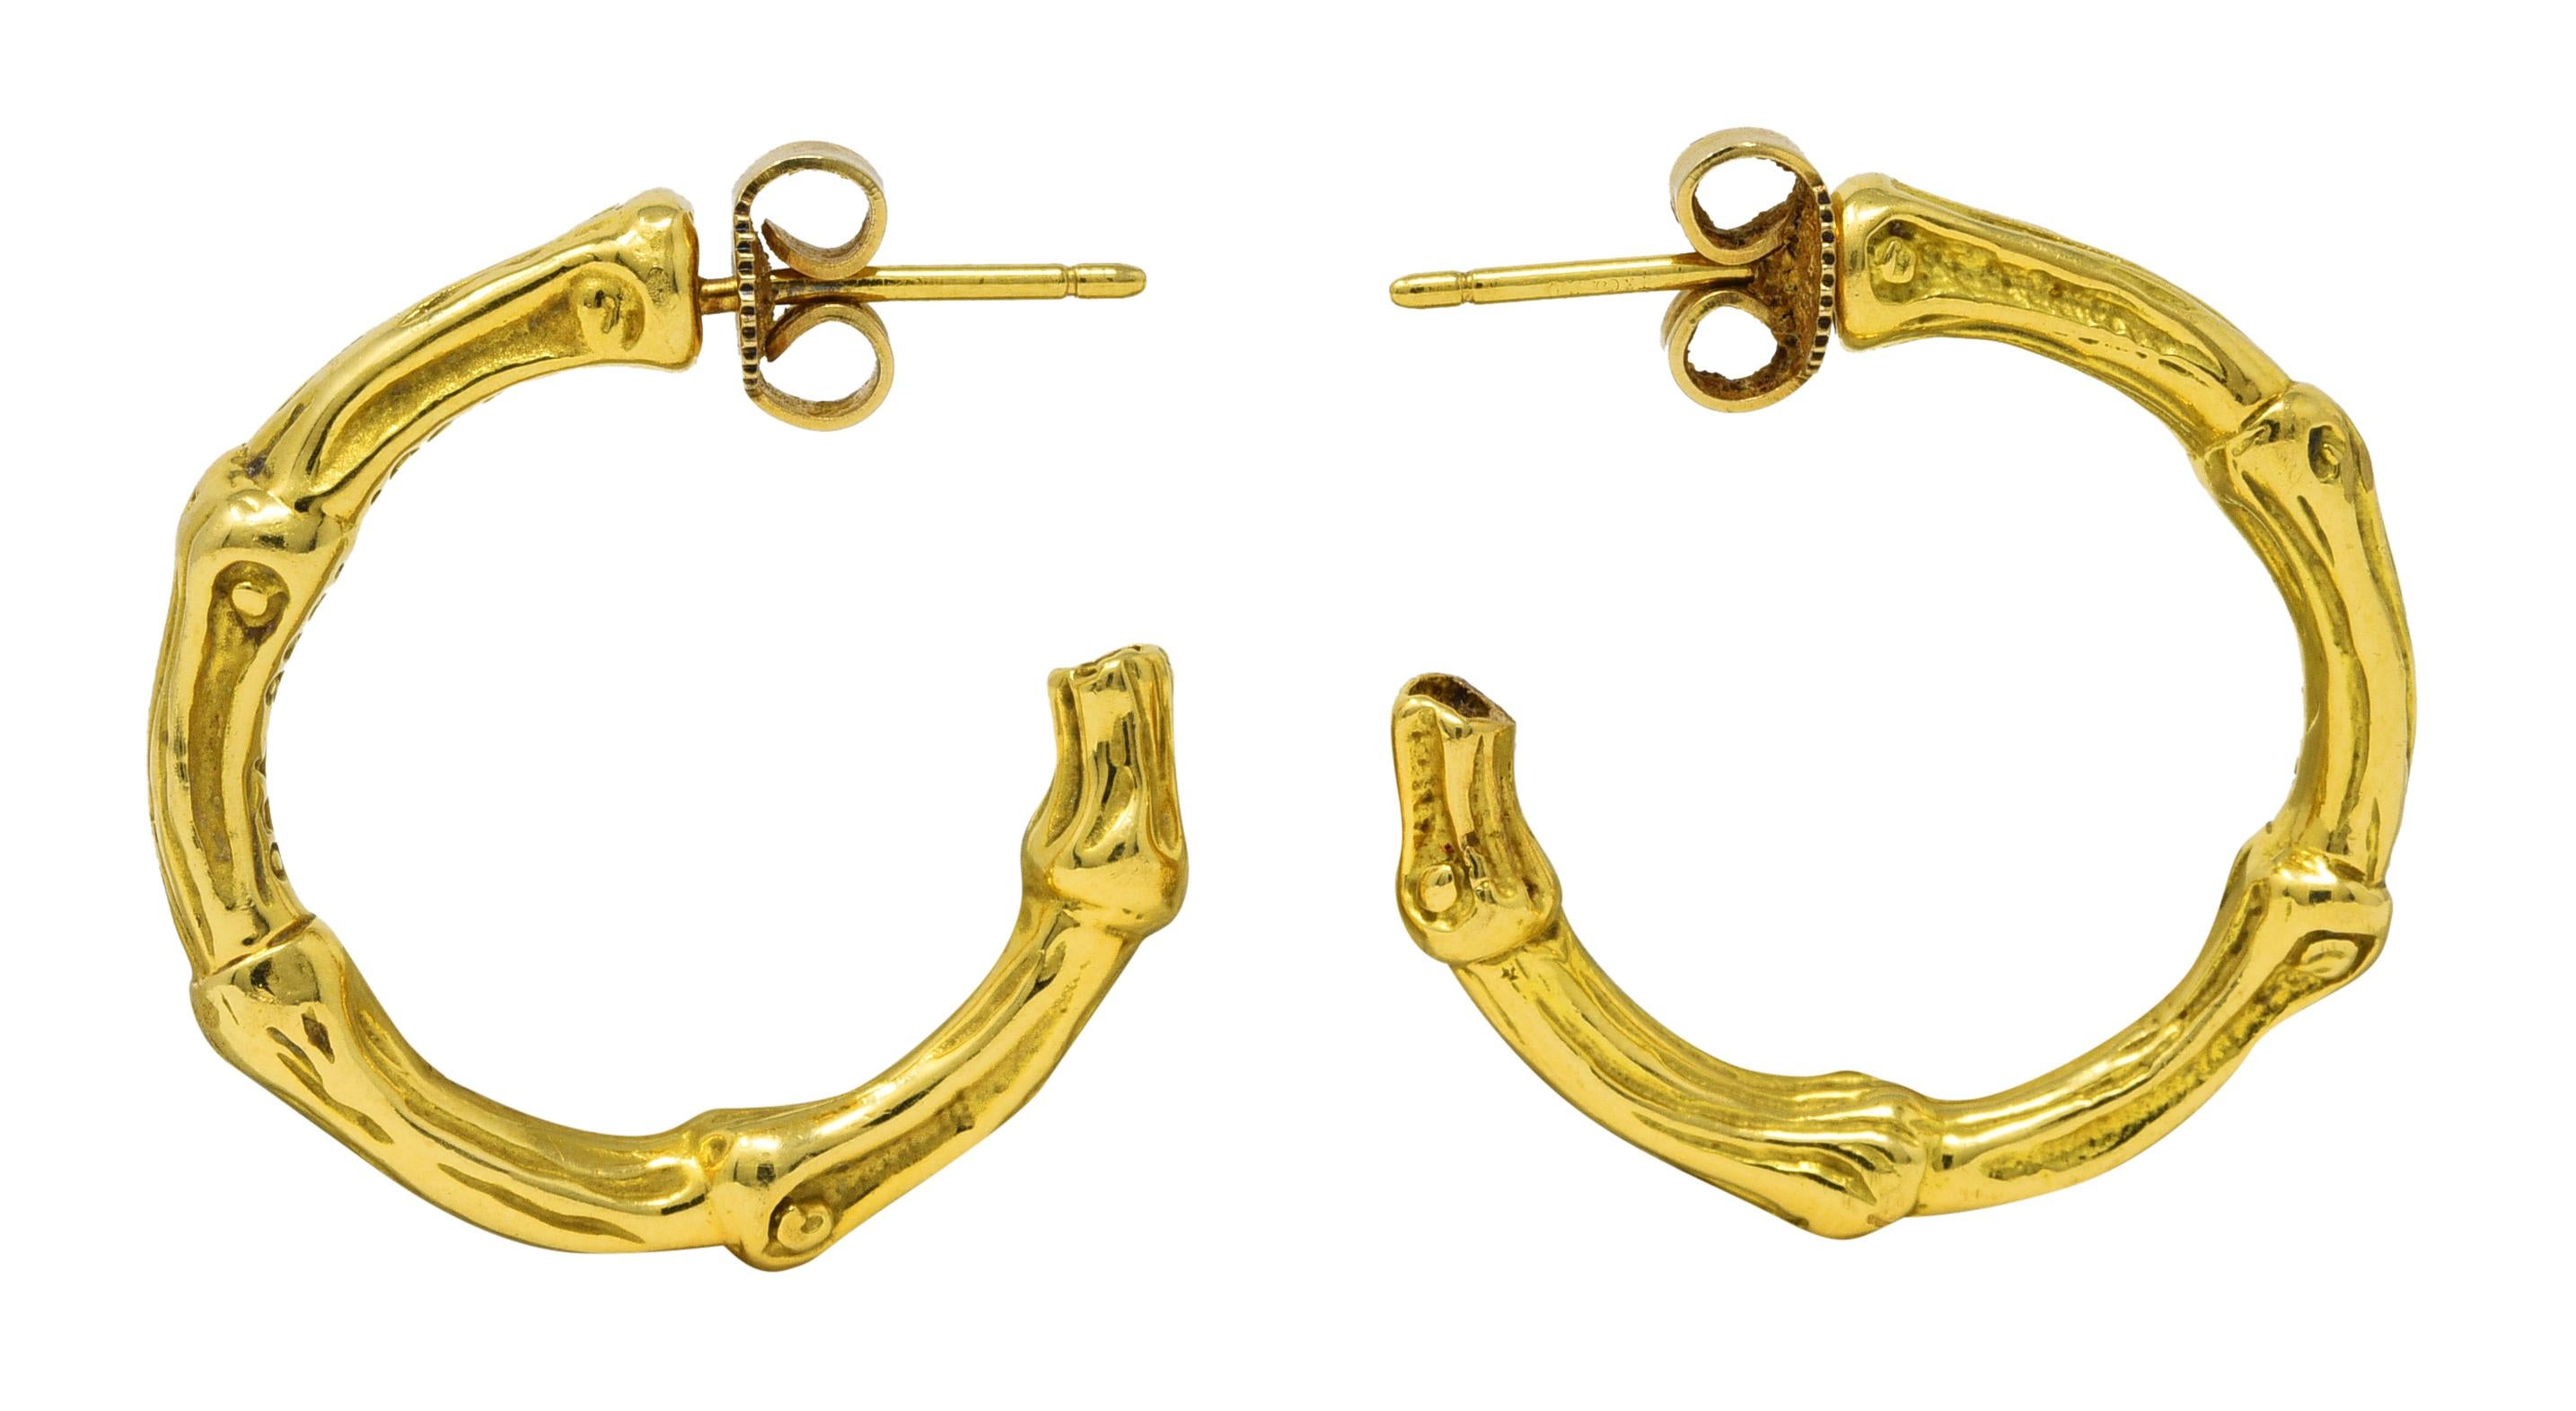 J hoop earrings are designed as stylized bamboo motif. With grooved texture throughout. Completed by posts with friction backs. Stamped 750 for 18 karat gold. With maker's mark for Tiffany & Co.. Circa: stamped 1996. Measures: 1 x 1 inch. Total